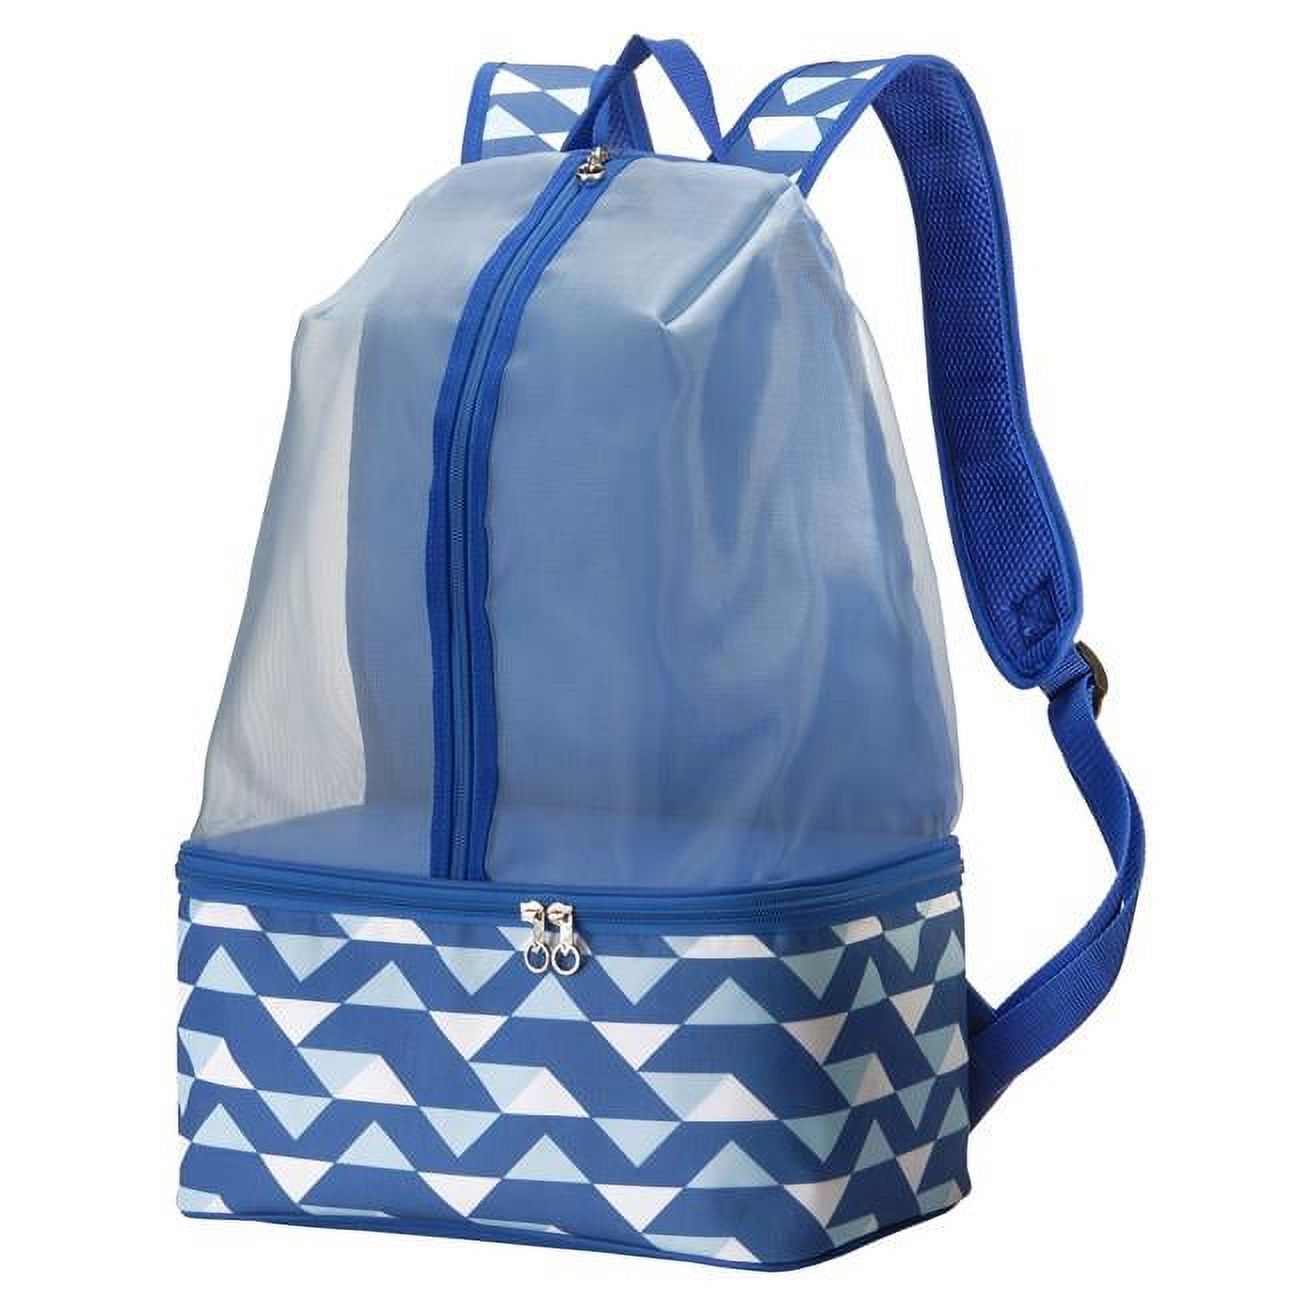 Backpack Style Cooler Beach Bag - image 1 of 5